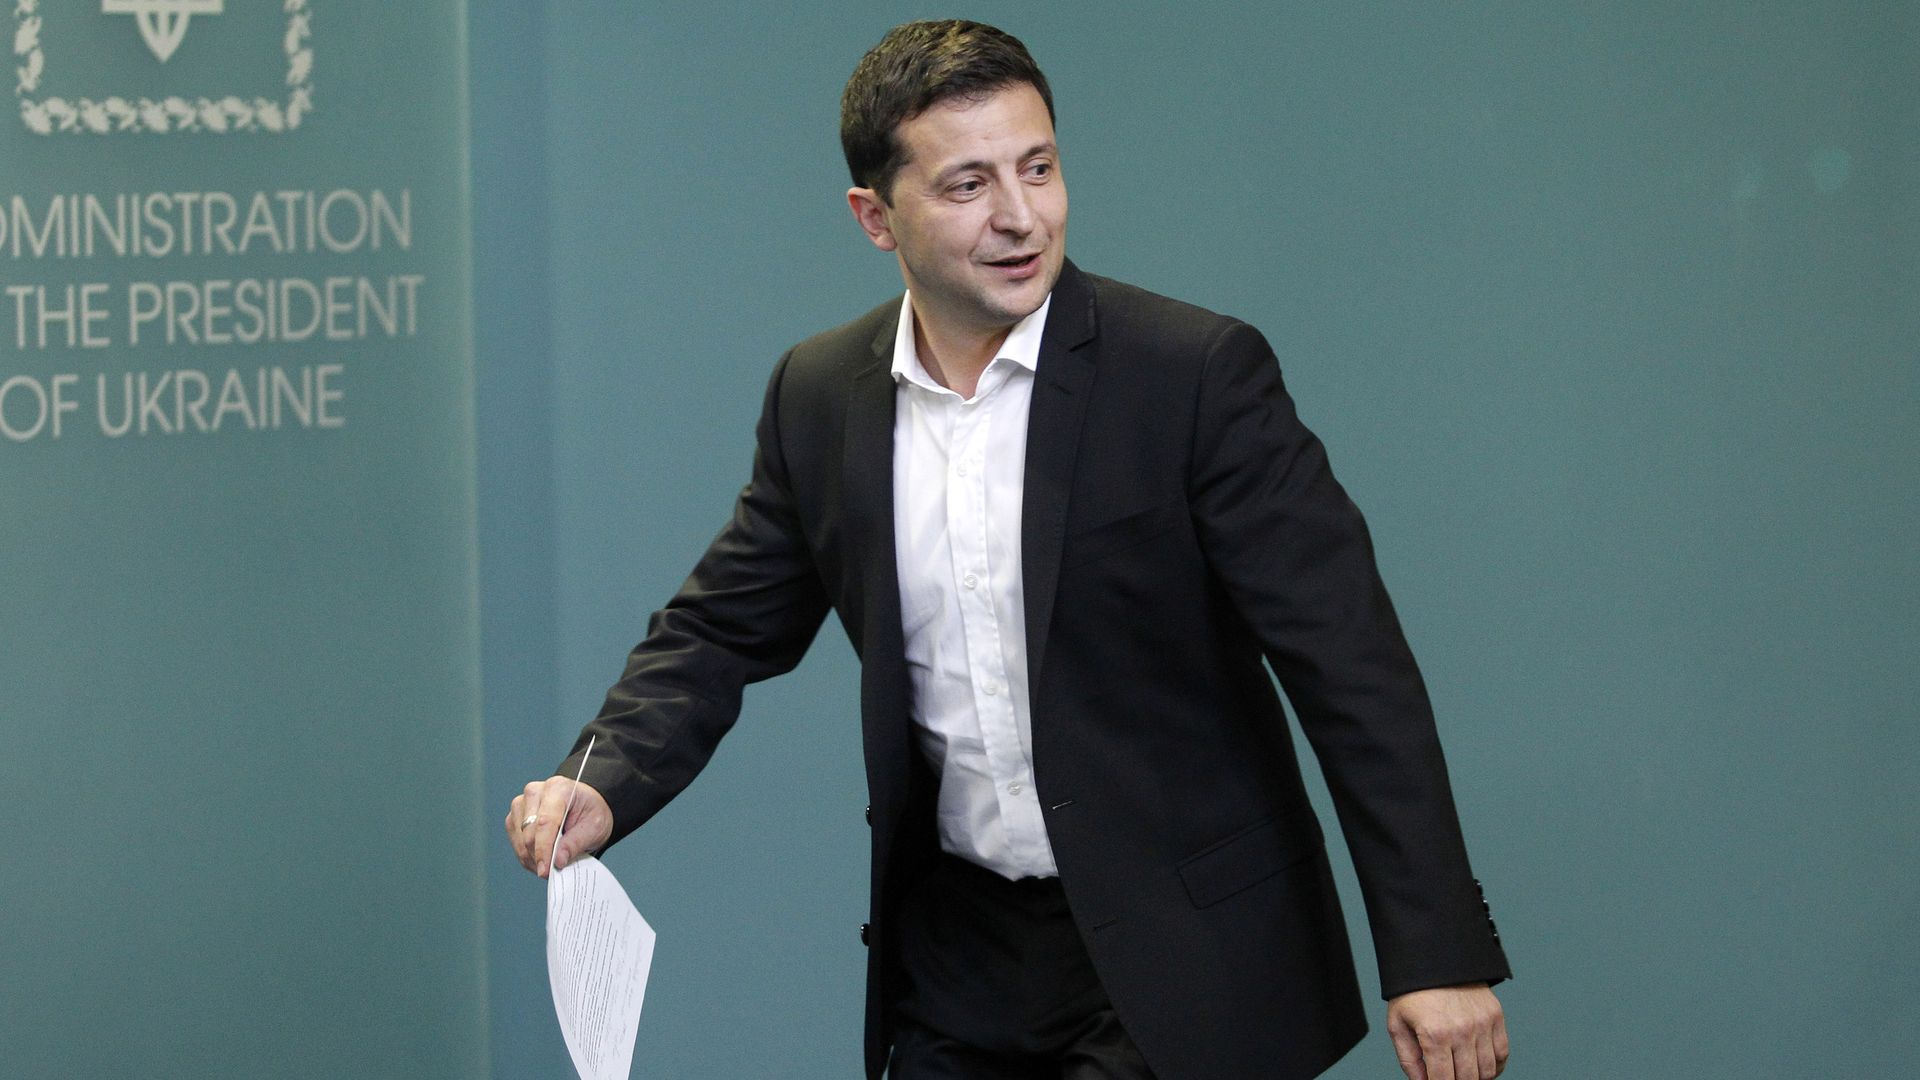 In this image, Zelensky walks while holding a piece of paper.